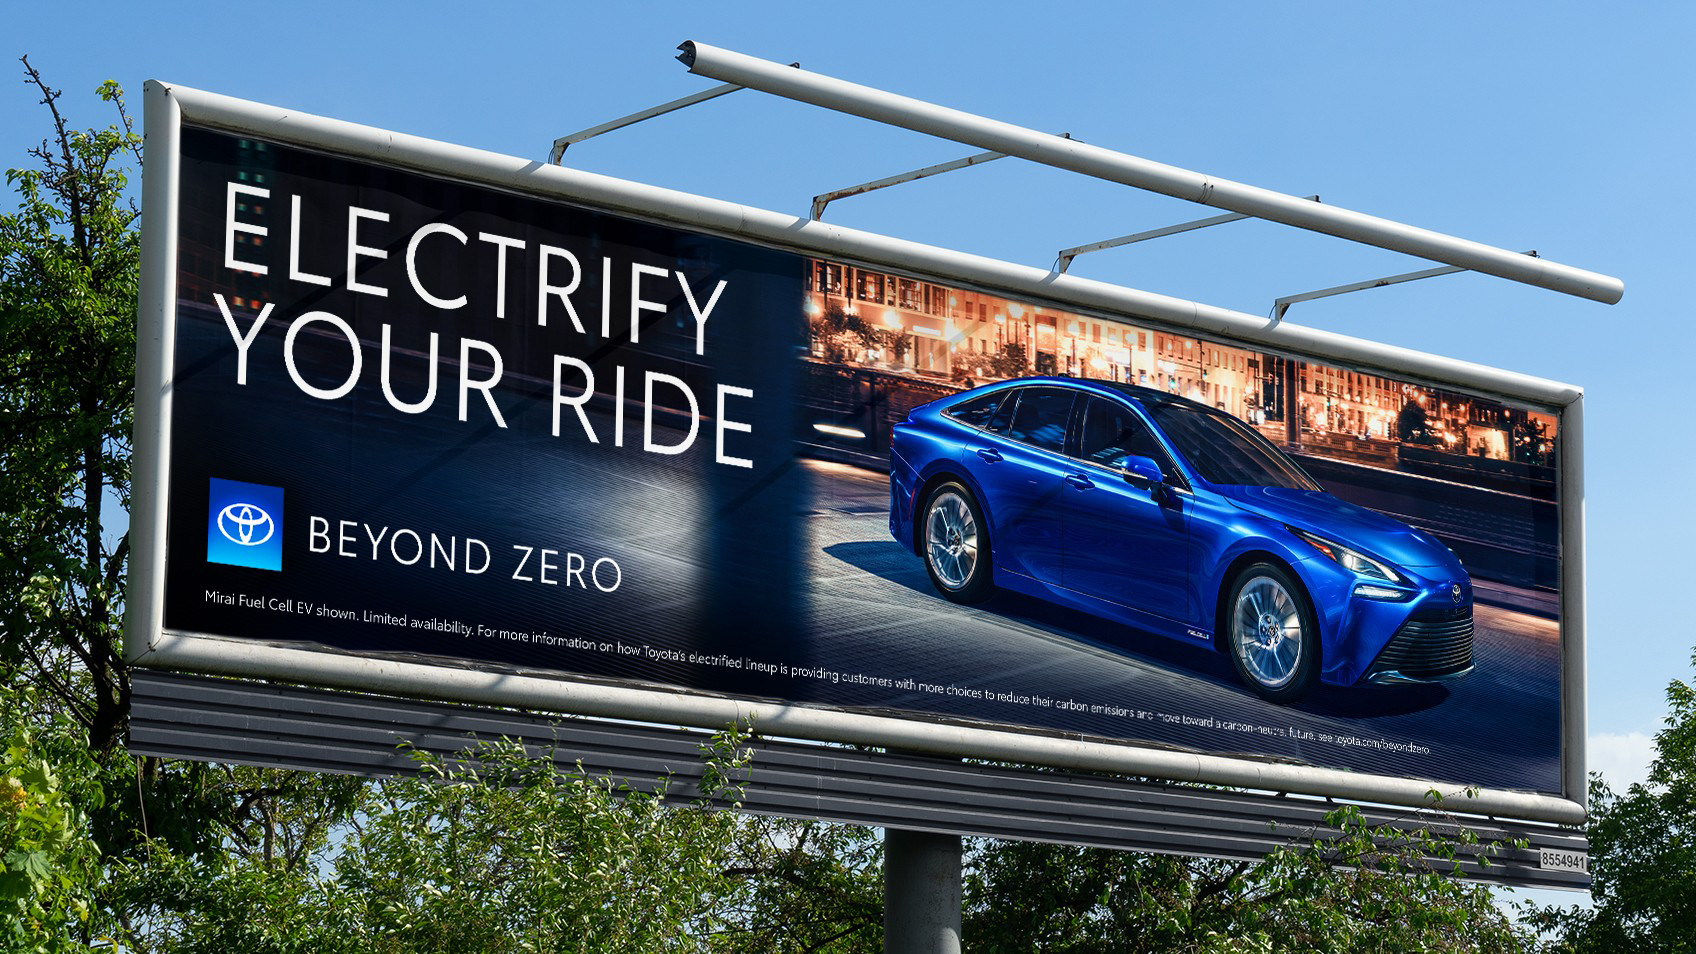 Beyond Zero billboard ad with sky and trees in background. The ad shows a blue Mirai with the headline “Electrify Your Ride” with the Beyond Zero logo bottom left and disclaimer below.